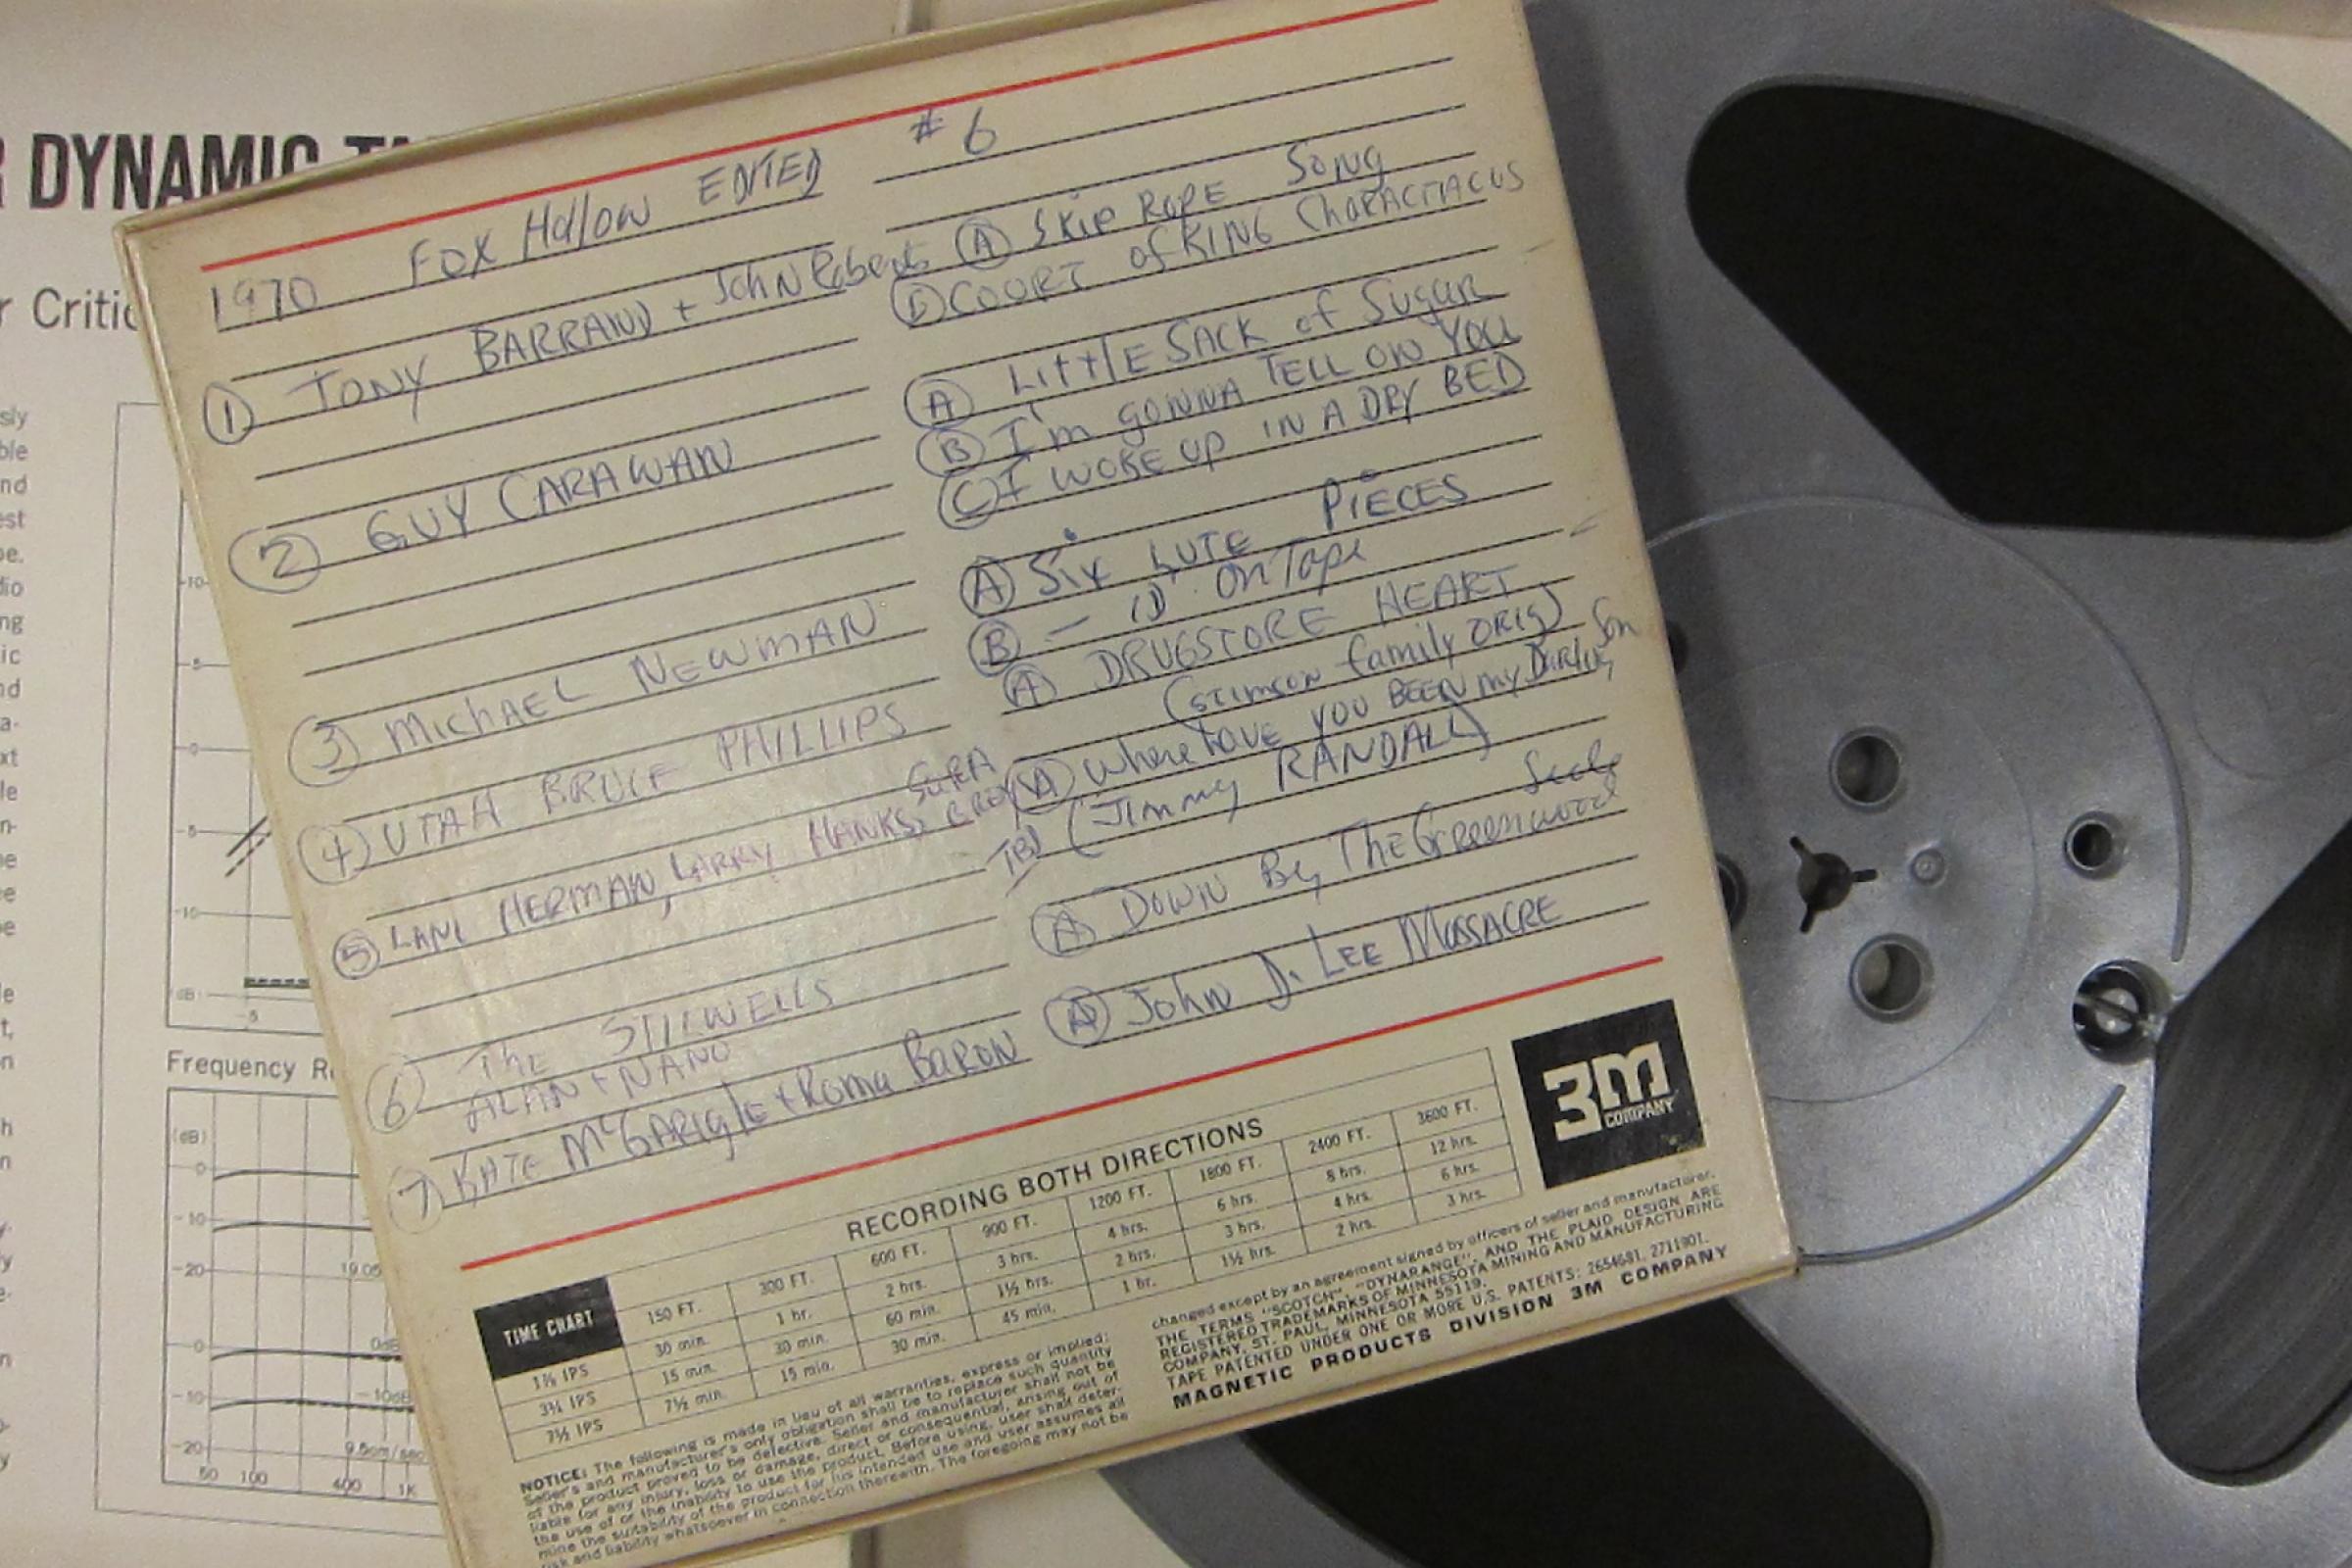 Track listing and reel-to-reel tape